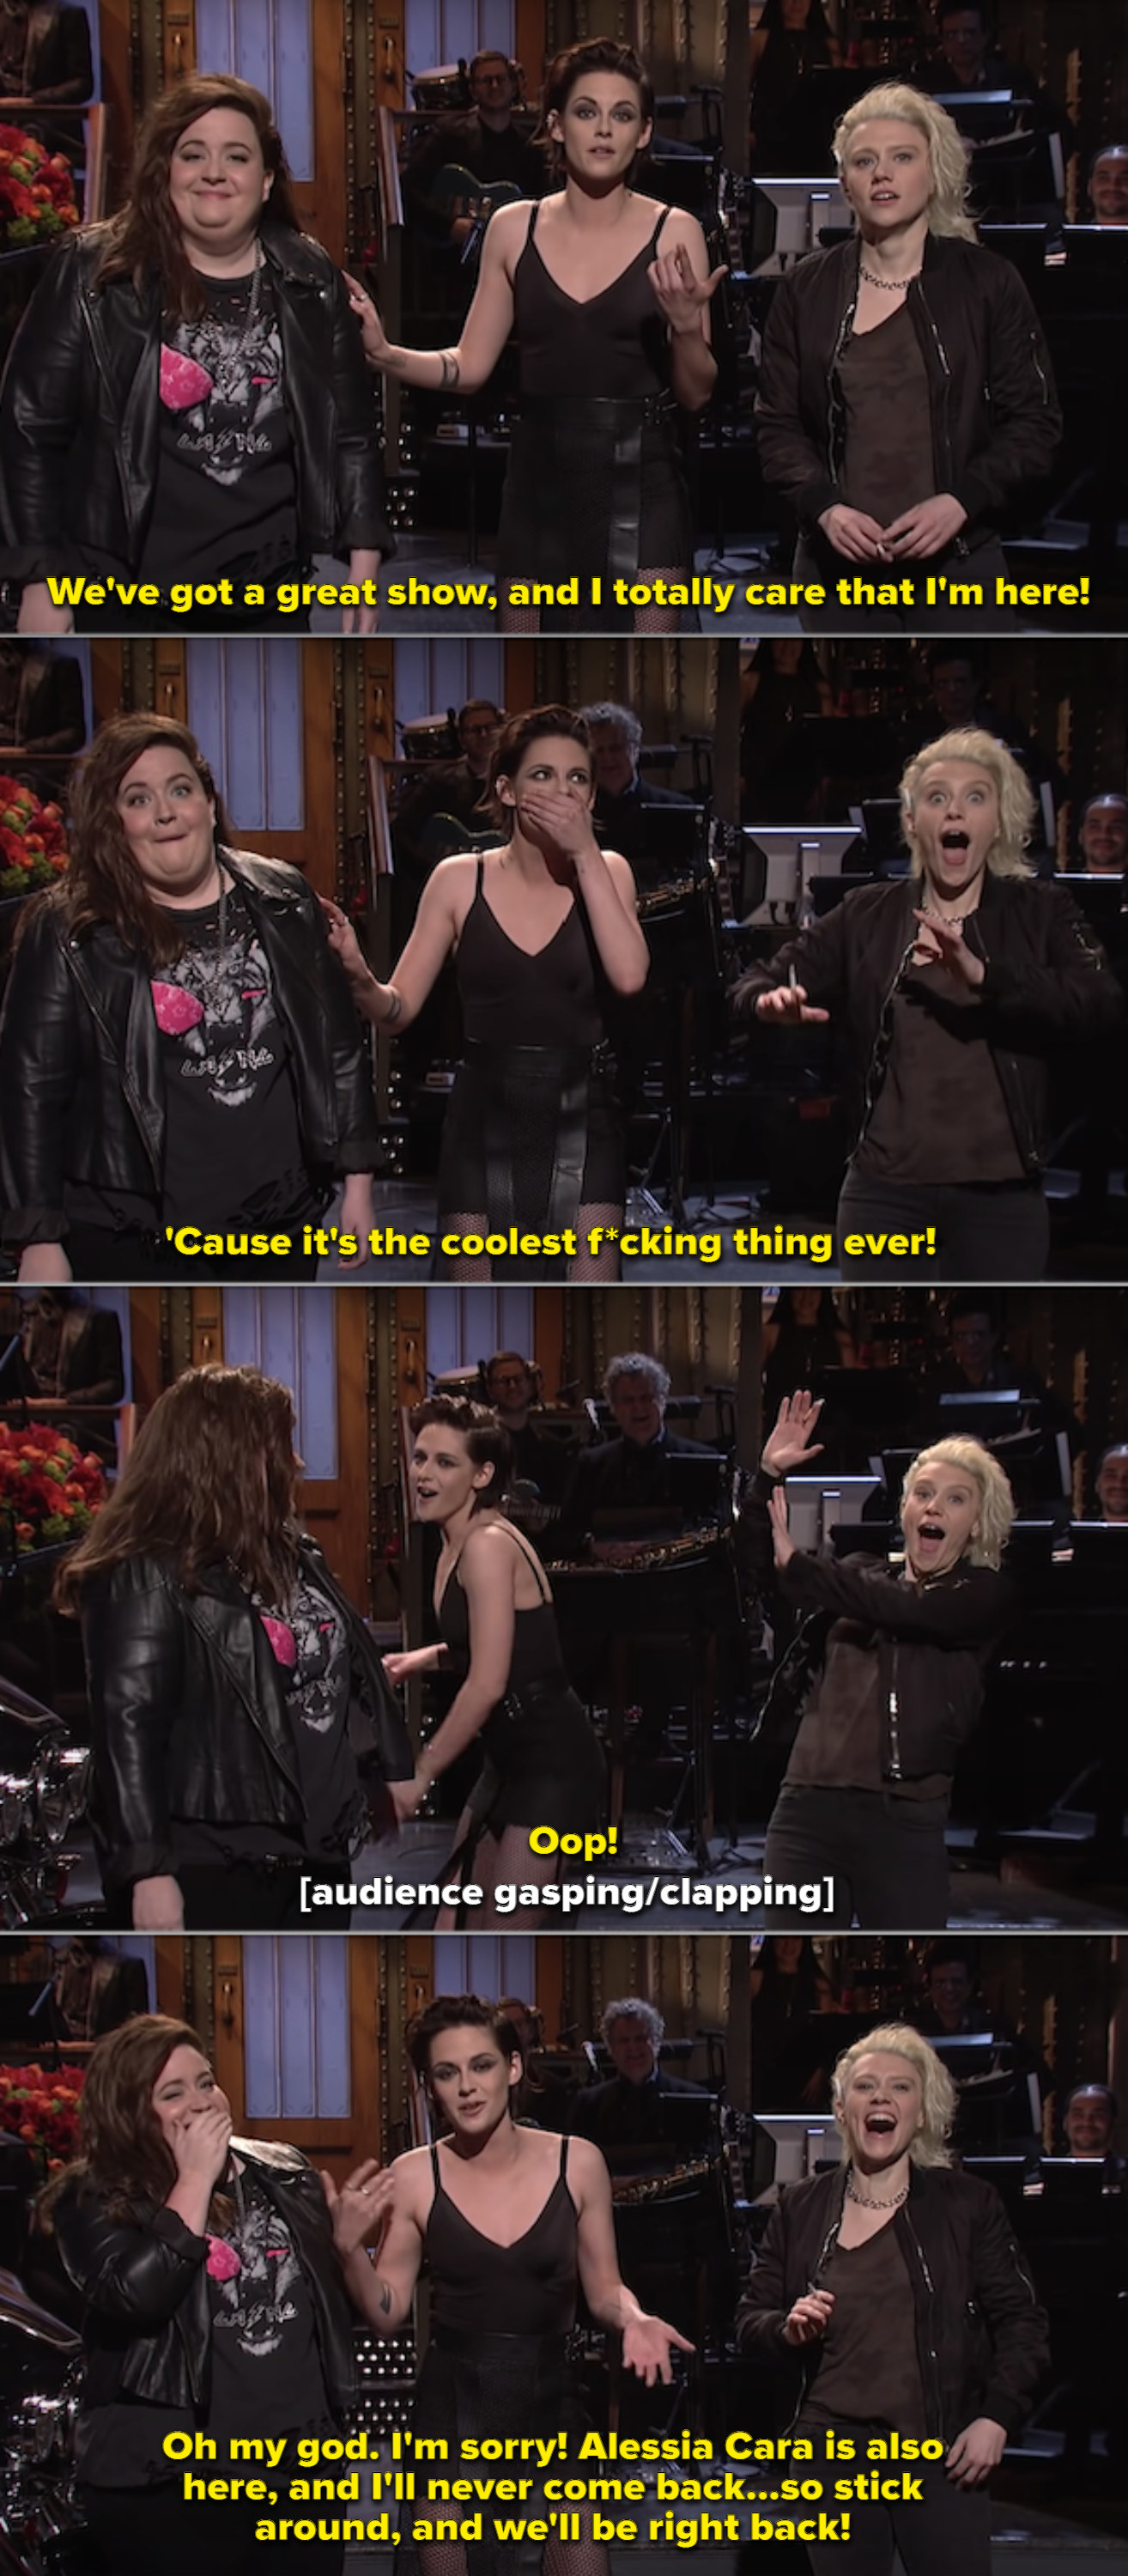 Kristen Stewart accidentally saying &quot;fuck&quot; on stage as Kate McKinnon and Aidy Bryant burst out laughing